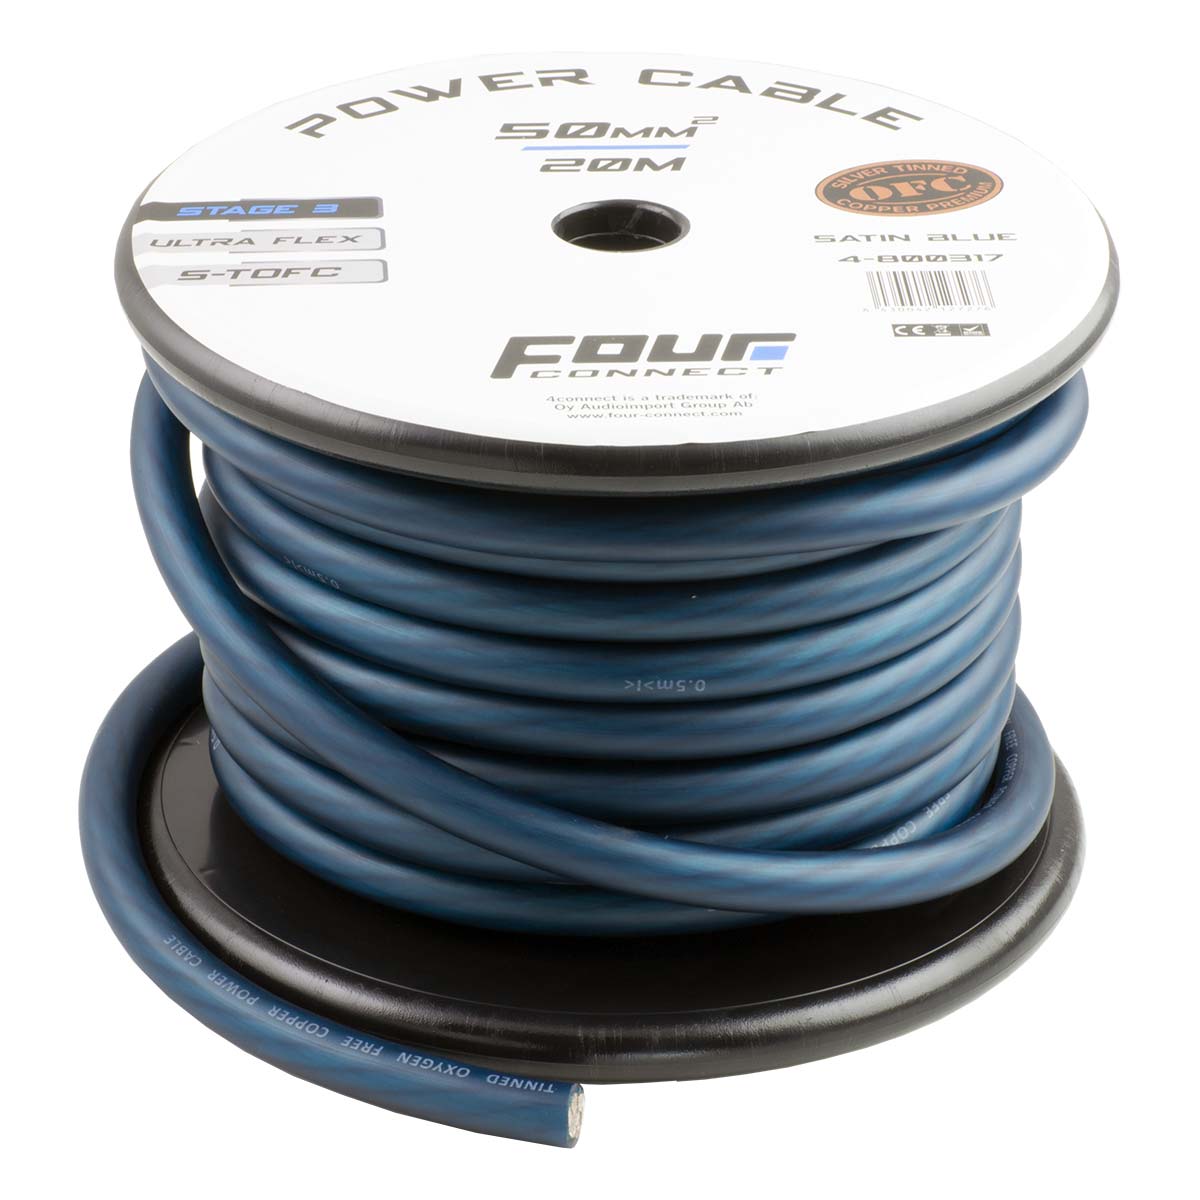 FOUR Connect 4-800317 STAGE3 50mm2 Satin Blue S-TOFC power cable